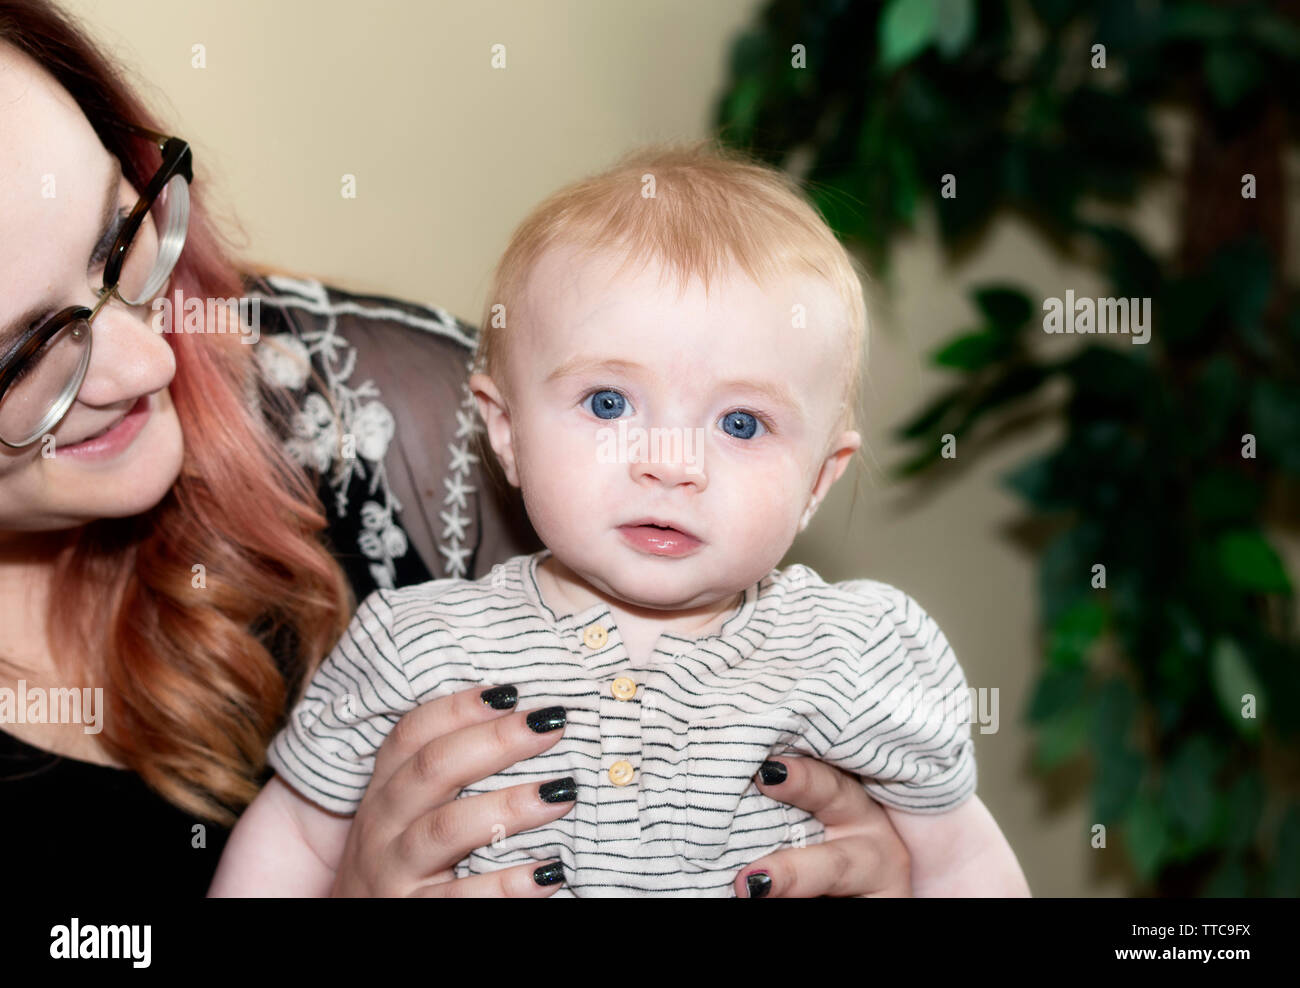 Red-headed Baby Boy Held by Mother Looking Straight at Camera with Big Blue Eyes Stock Photo